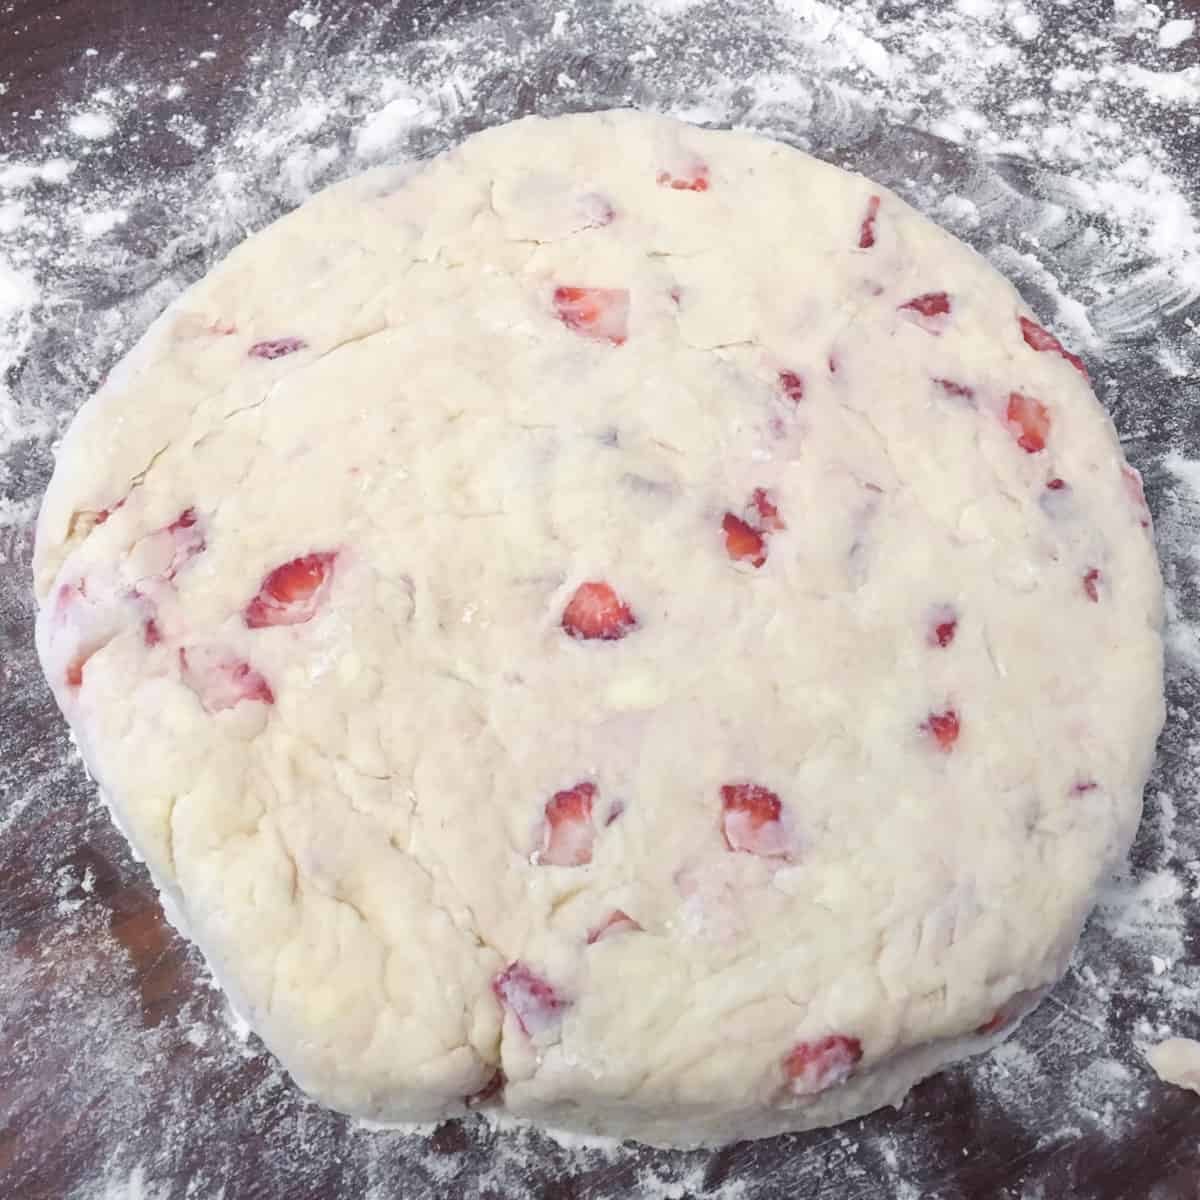 Scone dough shaped into a circle on the cutting board.